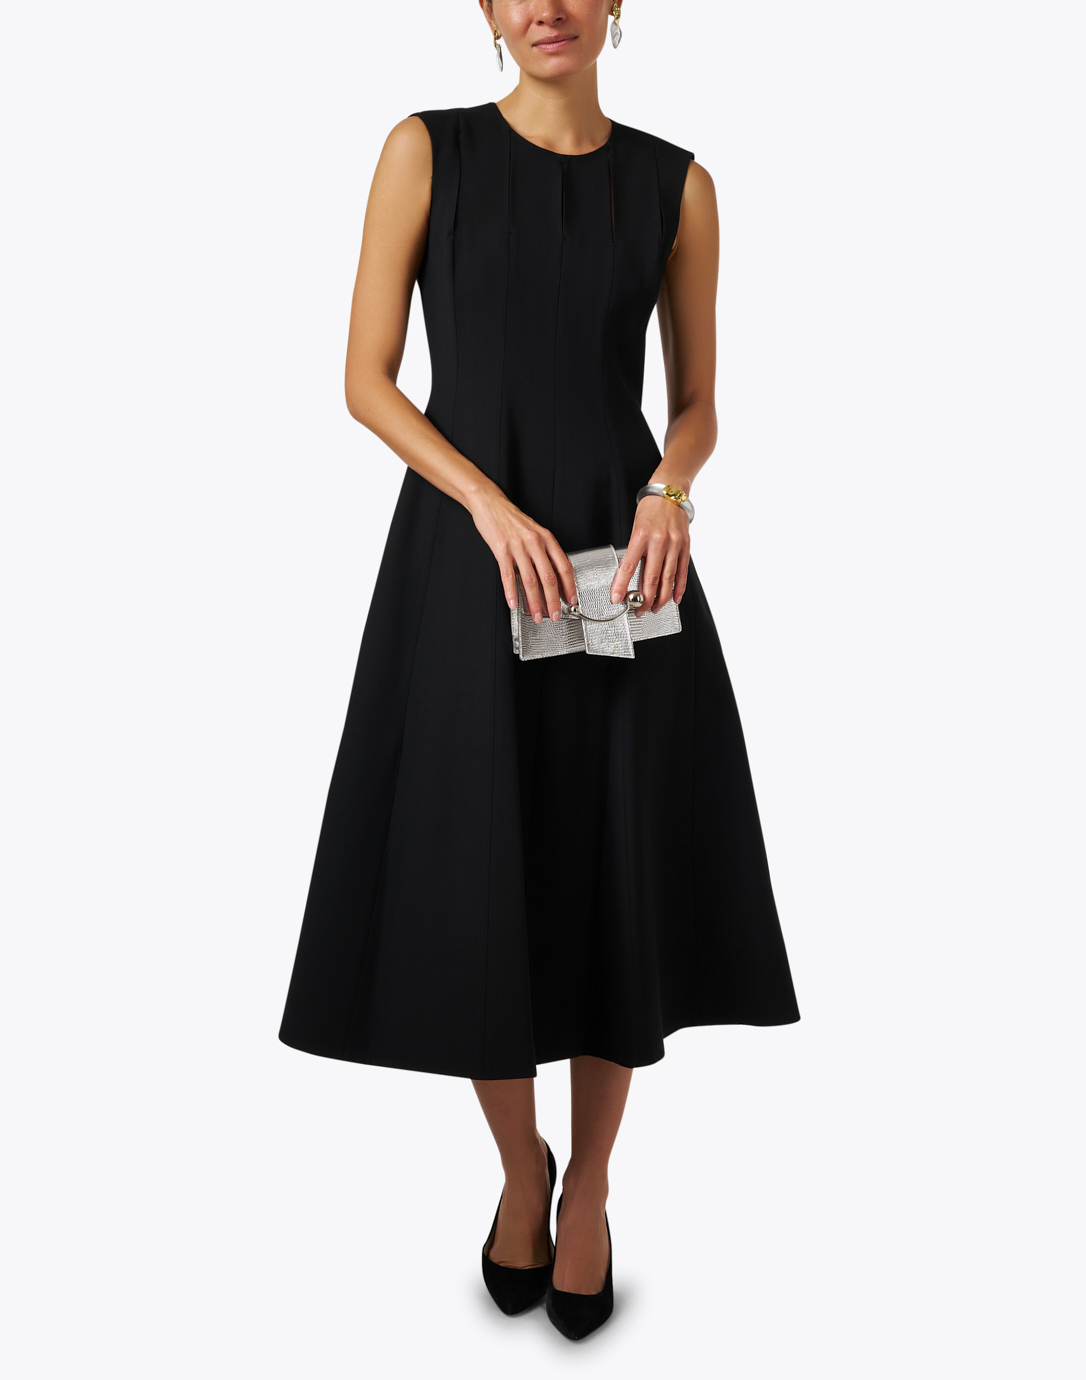 Black Cutout Fit and Flare Dress